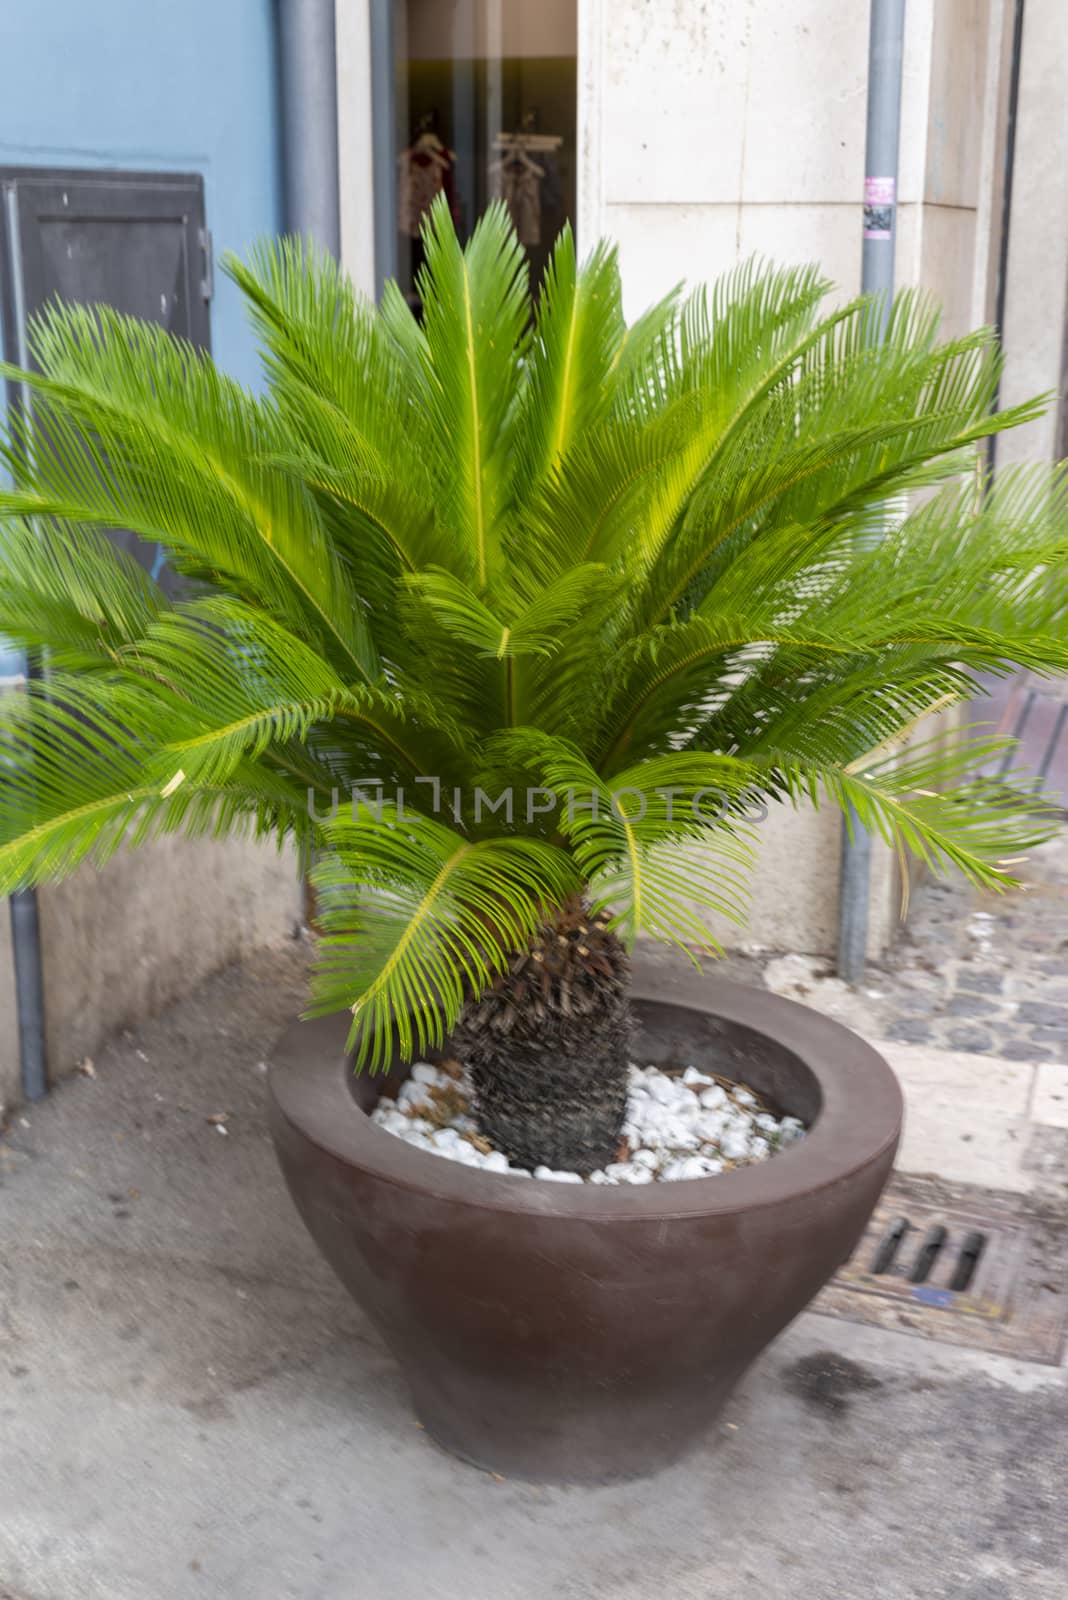 small palm tree on a vase as a display by carfedeph